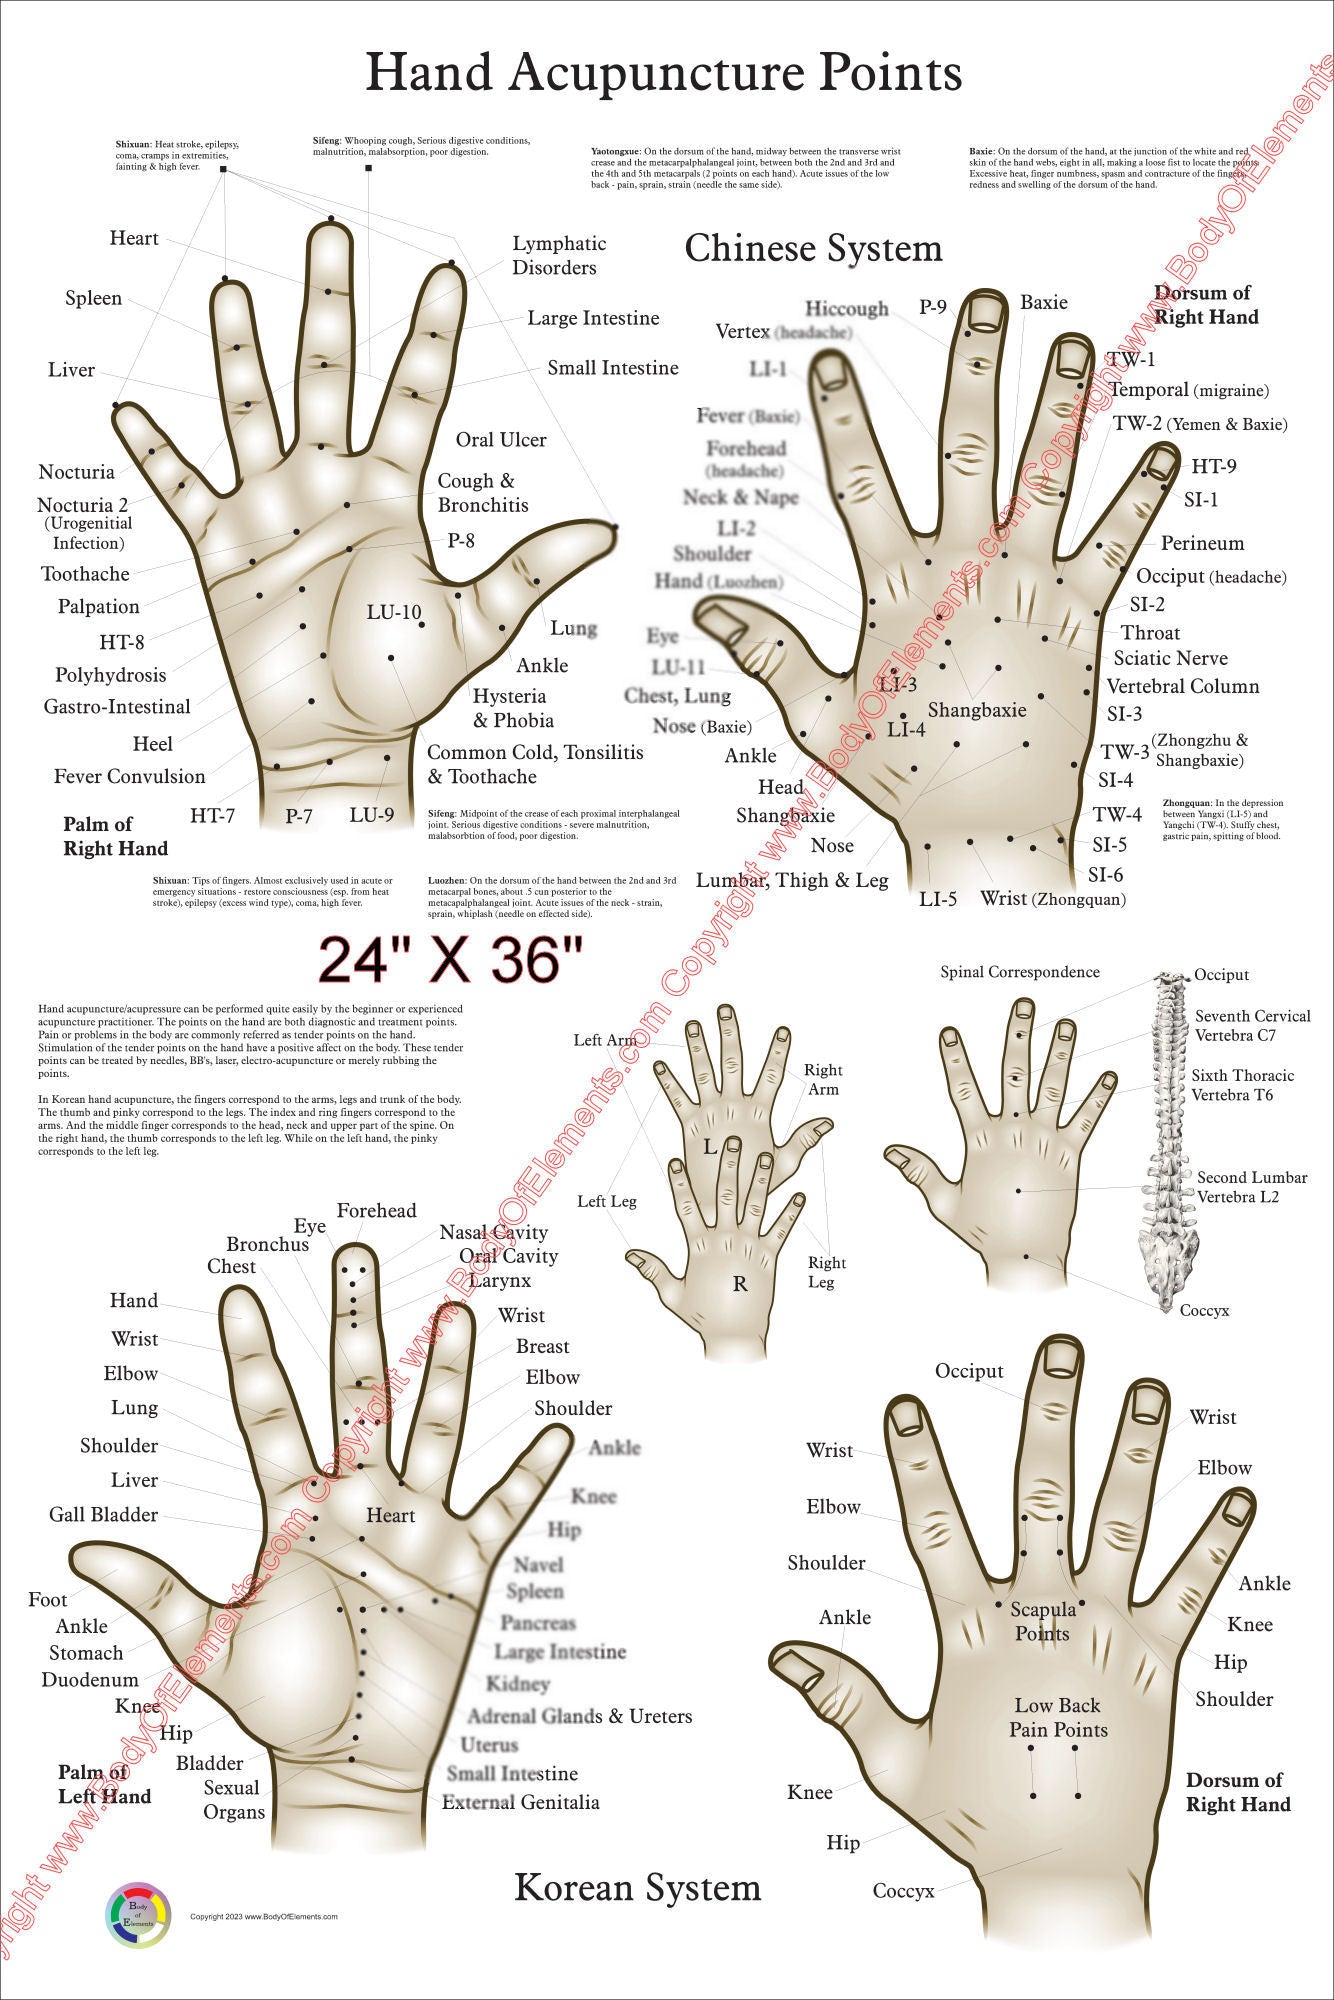 Hand acupuncture points poster